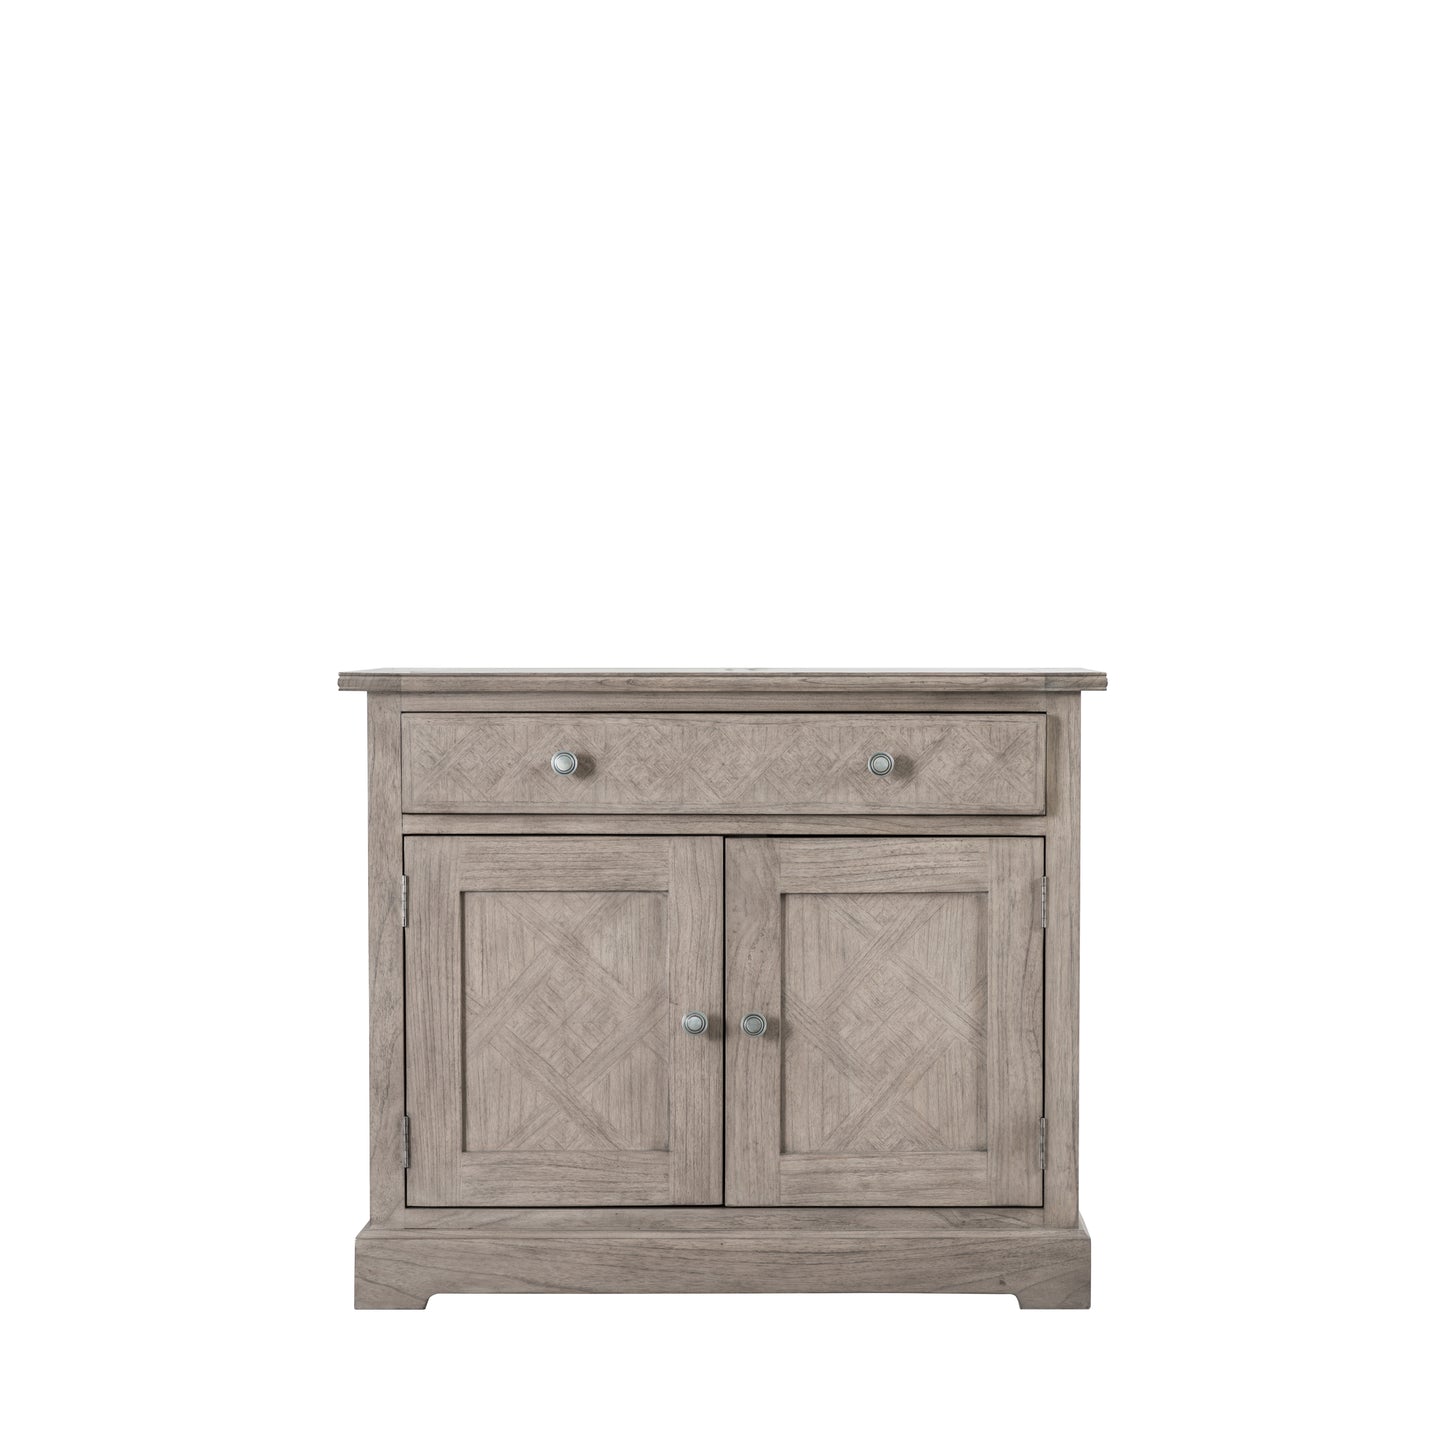 A Belsford 2 Door 1 Drawer Sideboard 960x450x800mm by Kikiathome.co.uk, perfect for home interior decor.